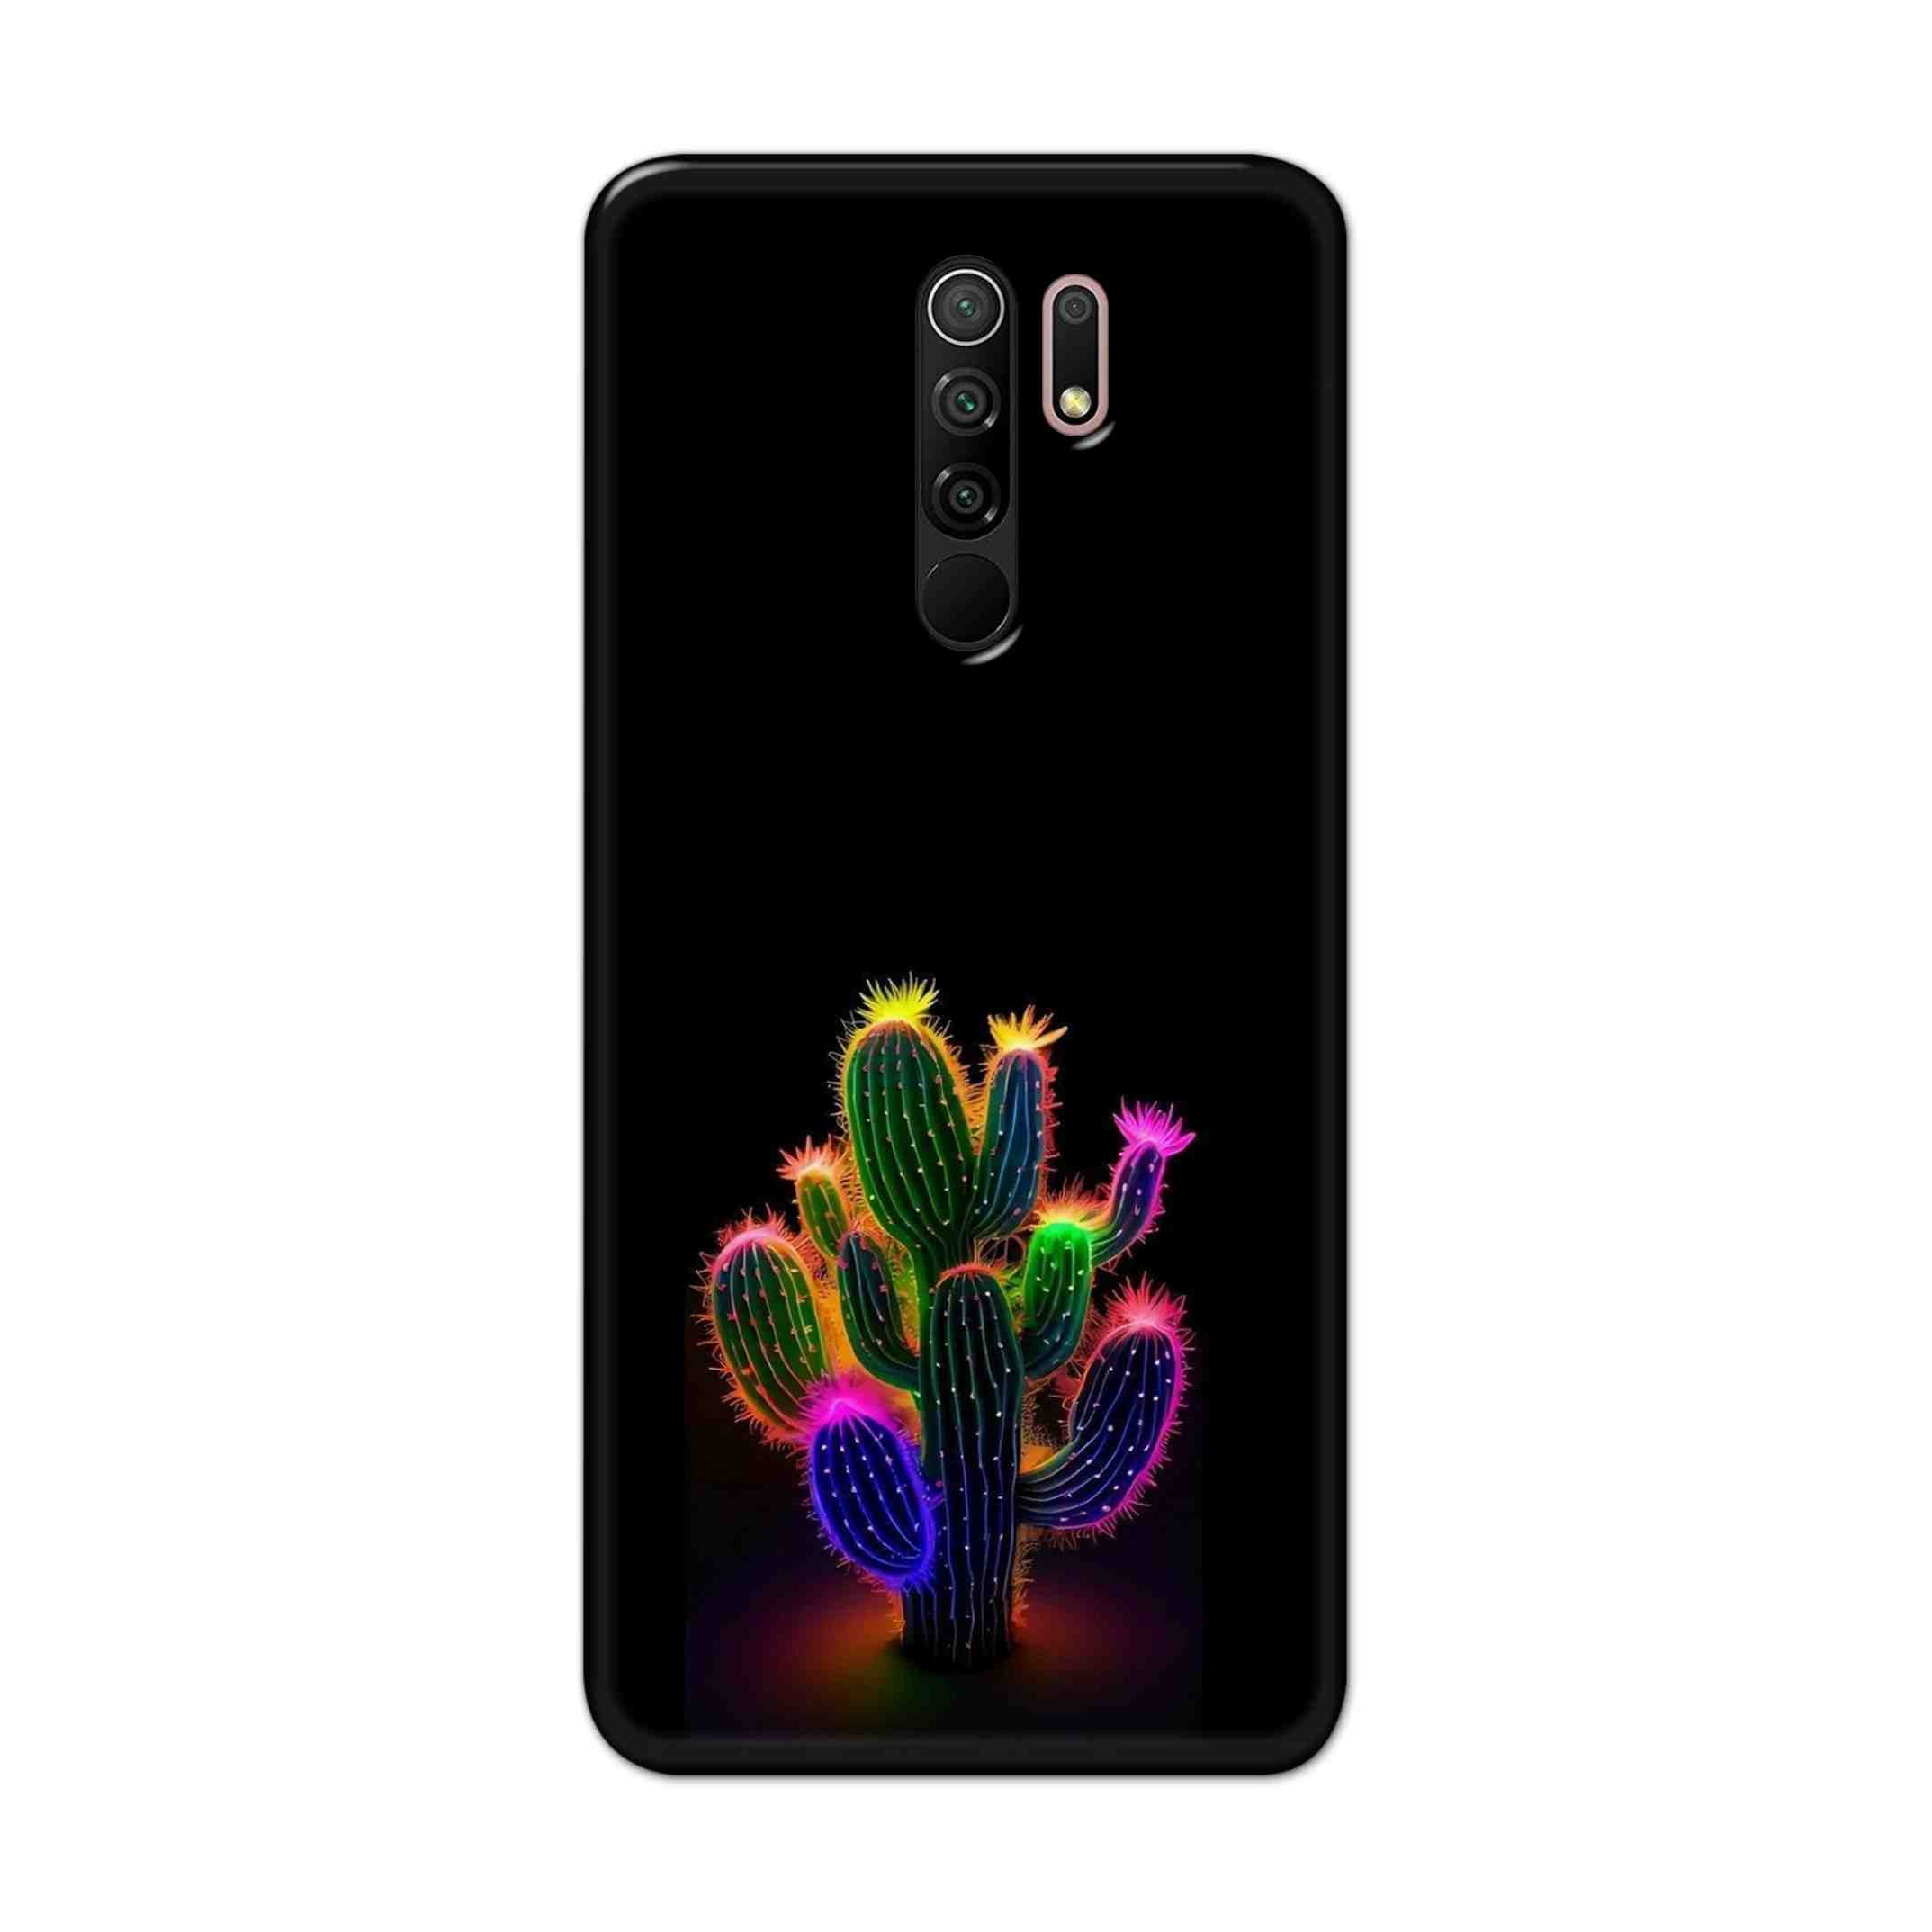 Buy Neon Flower Hard Back Mobile Phone Case Cover For Xiaomi Redmi 9 Prime Online